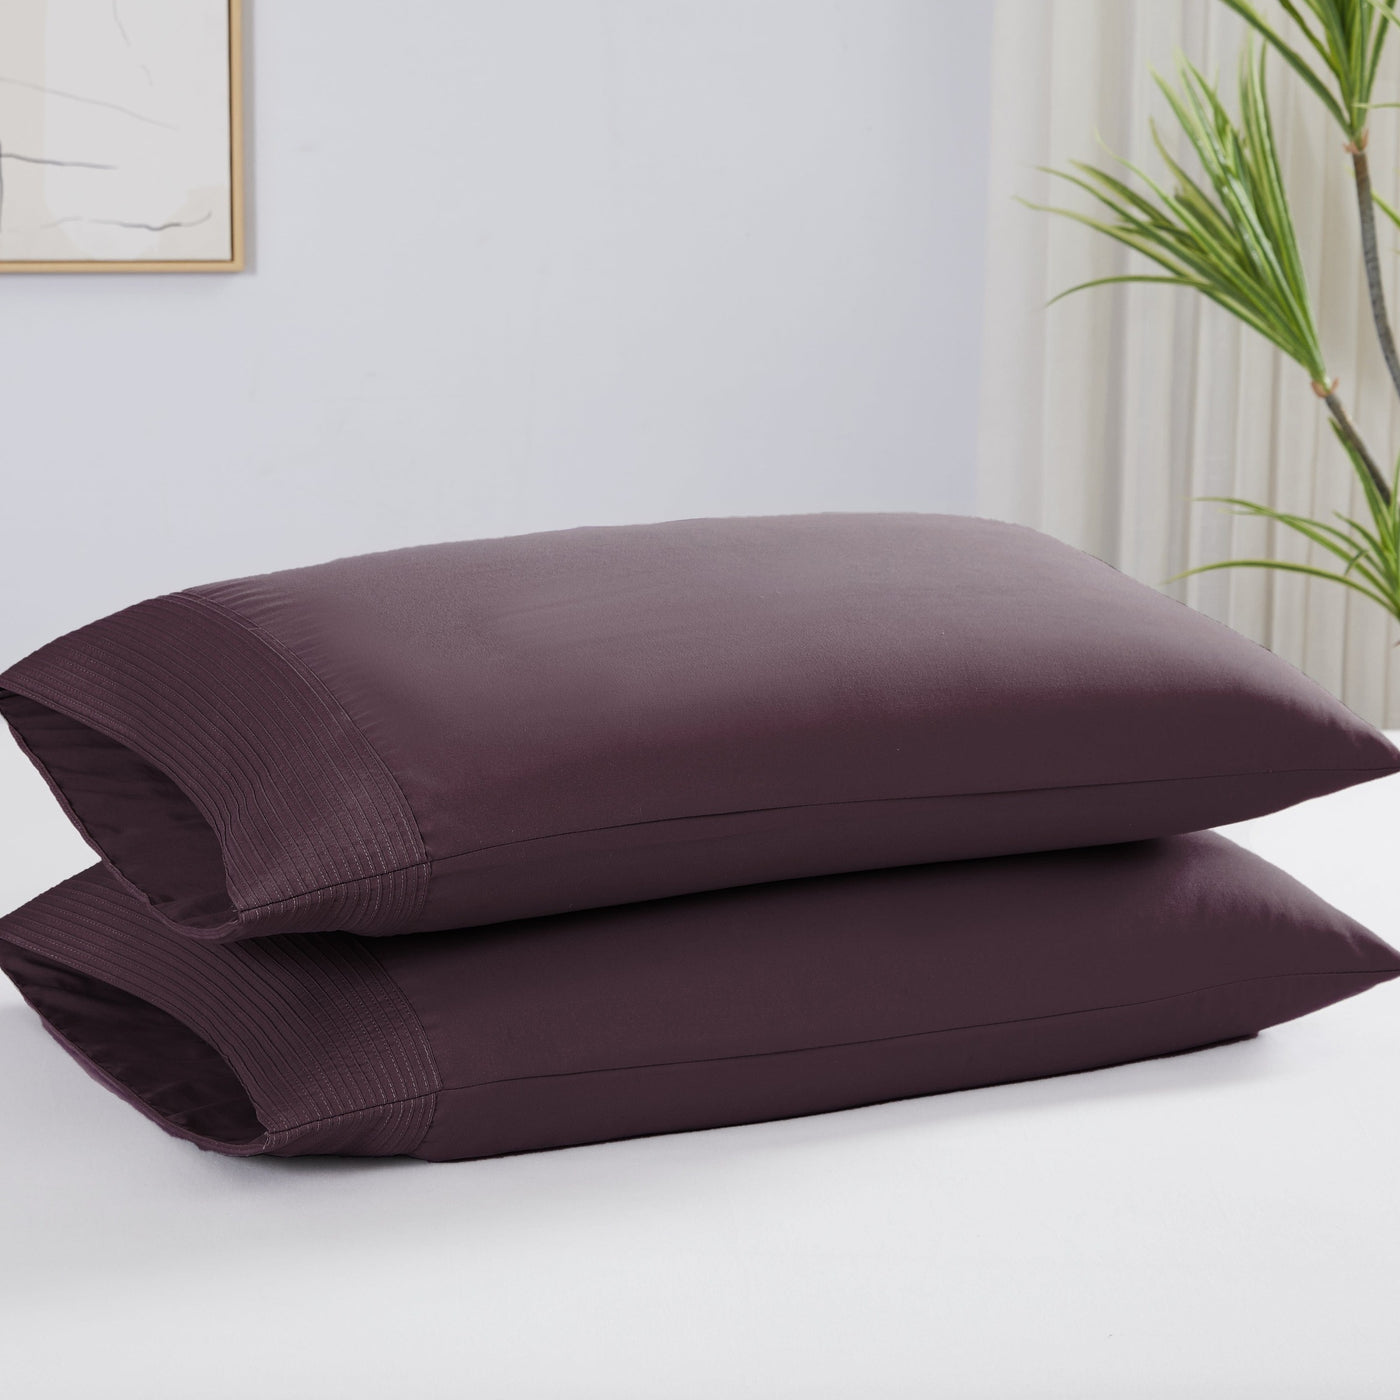 Two Vilano Pleated Pillow Cases in Purple Stack Together#color_vilano-purple